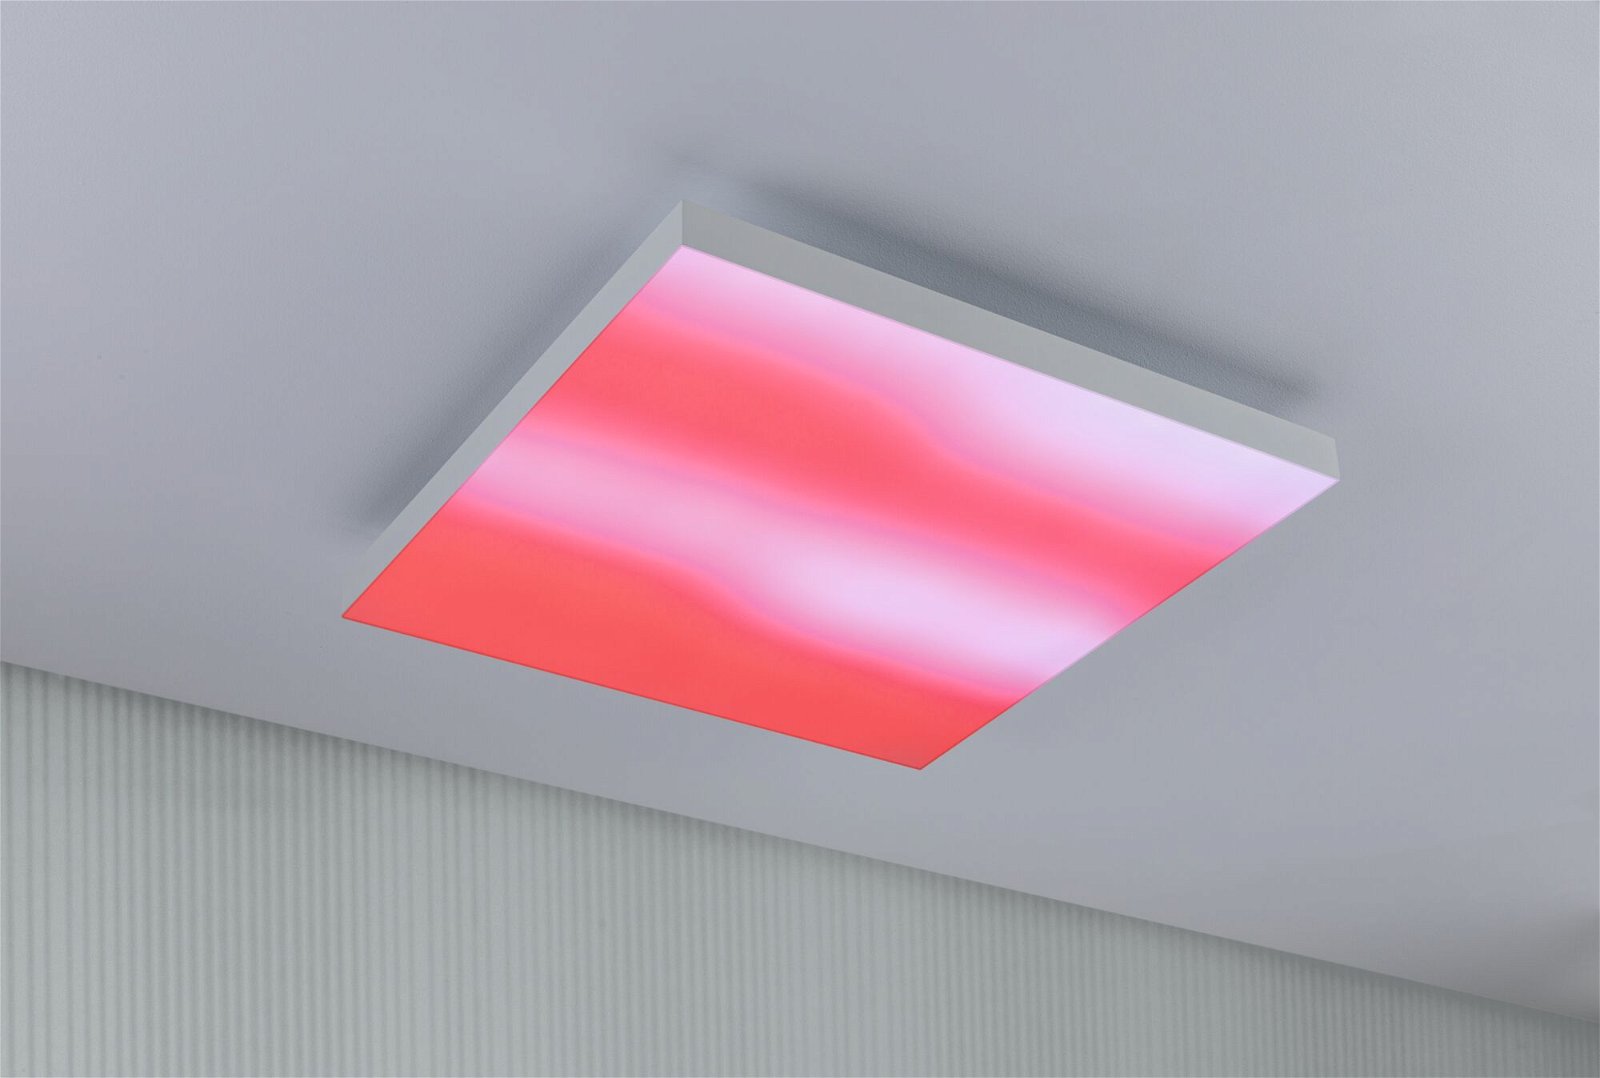 LED Panel Velora Rainbow dynamicRGBW square 450x450mm 19W 1690lm 3000 - 6500K White dimmable